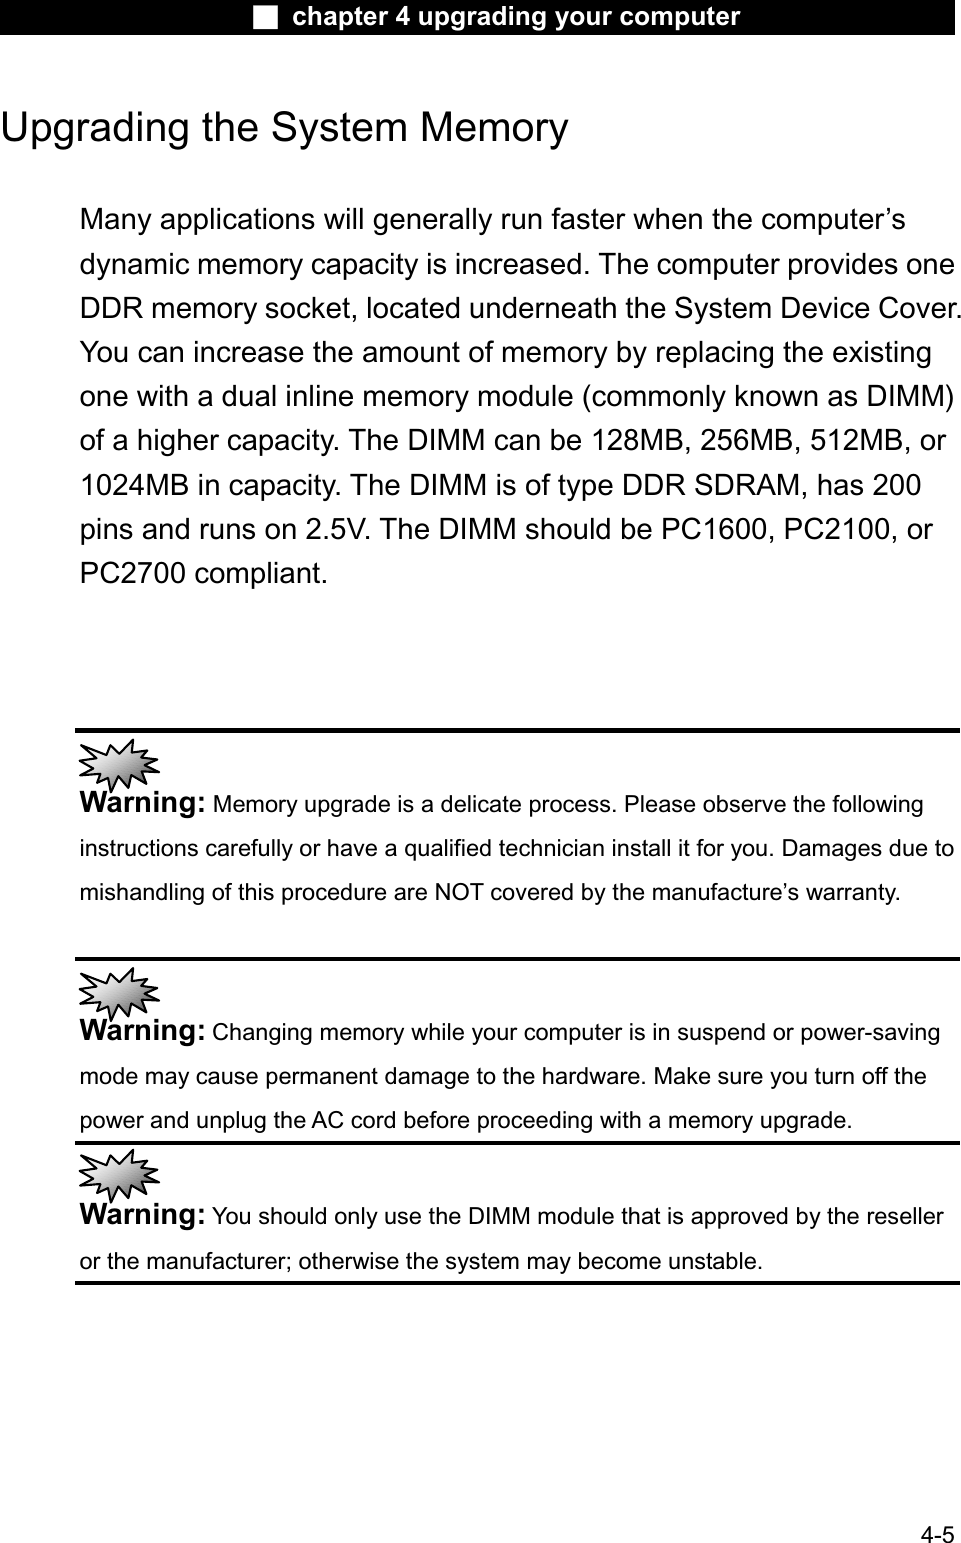 Ϯ chapter 4 upgrading your computerUpgrading the System Memory Many applications will generally run faster when the computer’sdynamic memory capacity is increased. The computer provides oneDDR memory socket, located underneath the System Device Cover.You can increase the amount of memory by replacing the existing one with a dual inline memory module (commonly known as DIMM)of a higher capacity. The DIMM can be 128MB, 256MB, 512MB, or 1024MB in capacity. The DIMM is of type DDR SDRAM, has 200 pins and runs on 2.5V. The DIMM should be PC1600, PC2100, orPC2700 compliant.Warning: Memory upgrade is a delicate process. Please observe the followinginstructions carefully or have a qualified technician install it for you. Damages due to mishandling of this procedure are NOT covered by the manufacture’s warranty.Warning: Changing memory while your computer is in suspend or power-savingmode may cause permanent damage to the hardware. Make sure you turn off the power and unplug the AC cord before proceeding with a memory upgrade.Warning: You should only use the DIMM module that is approved by the reselleror the manufacturer; otherwise the system may become unstable.4-5